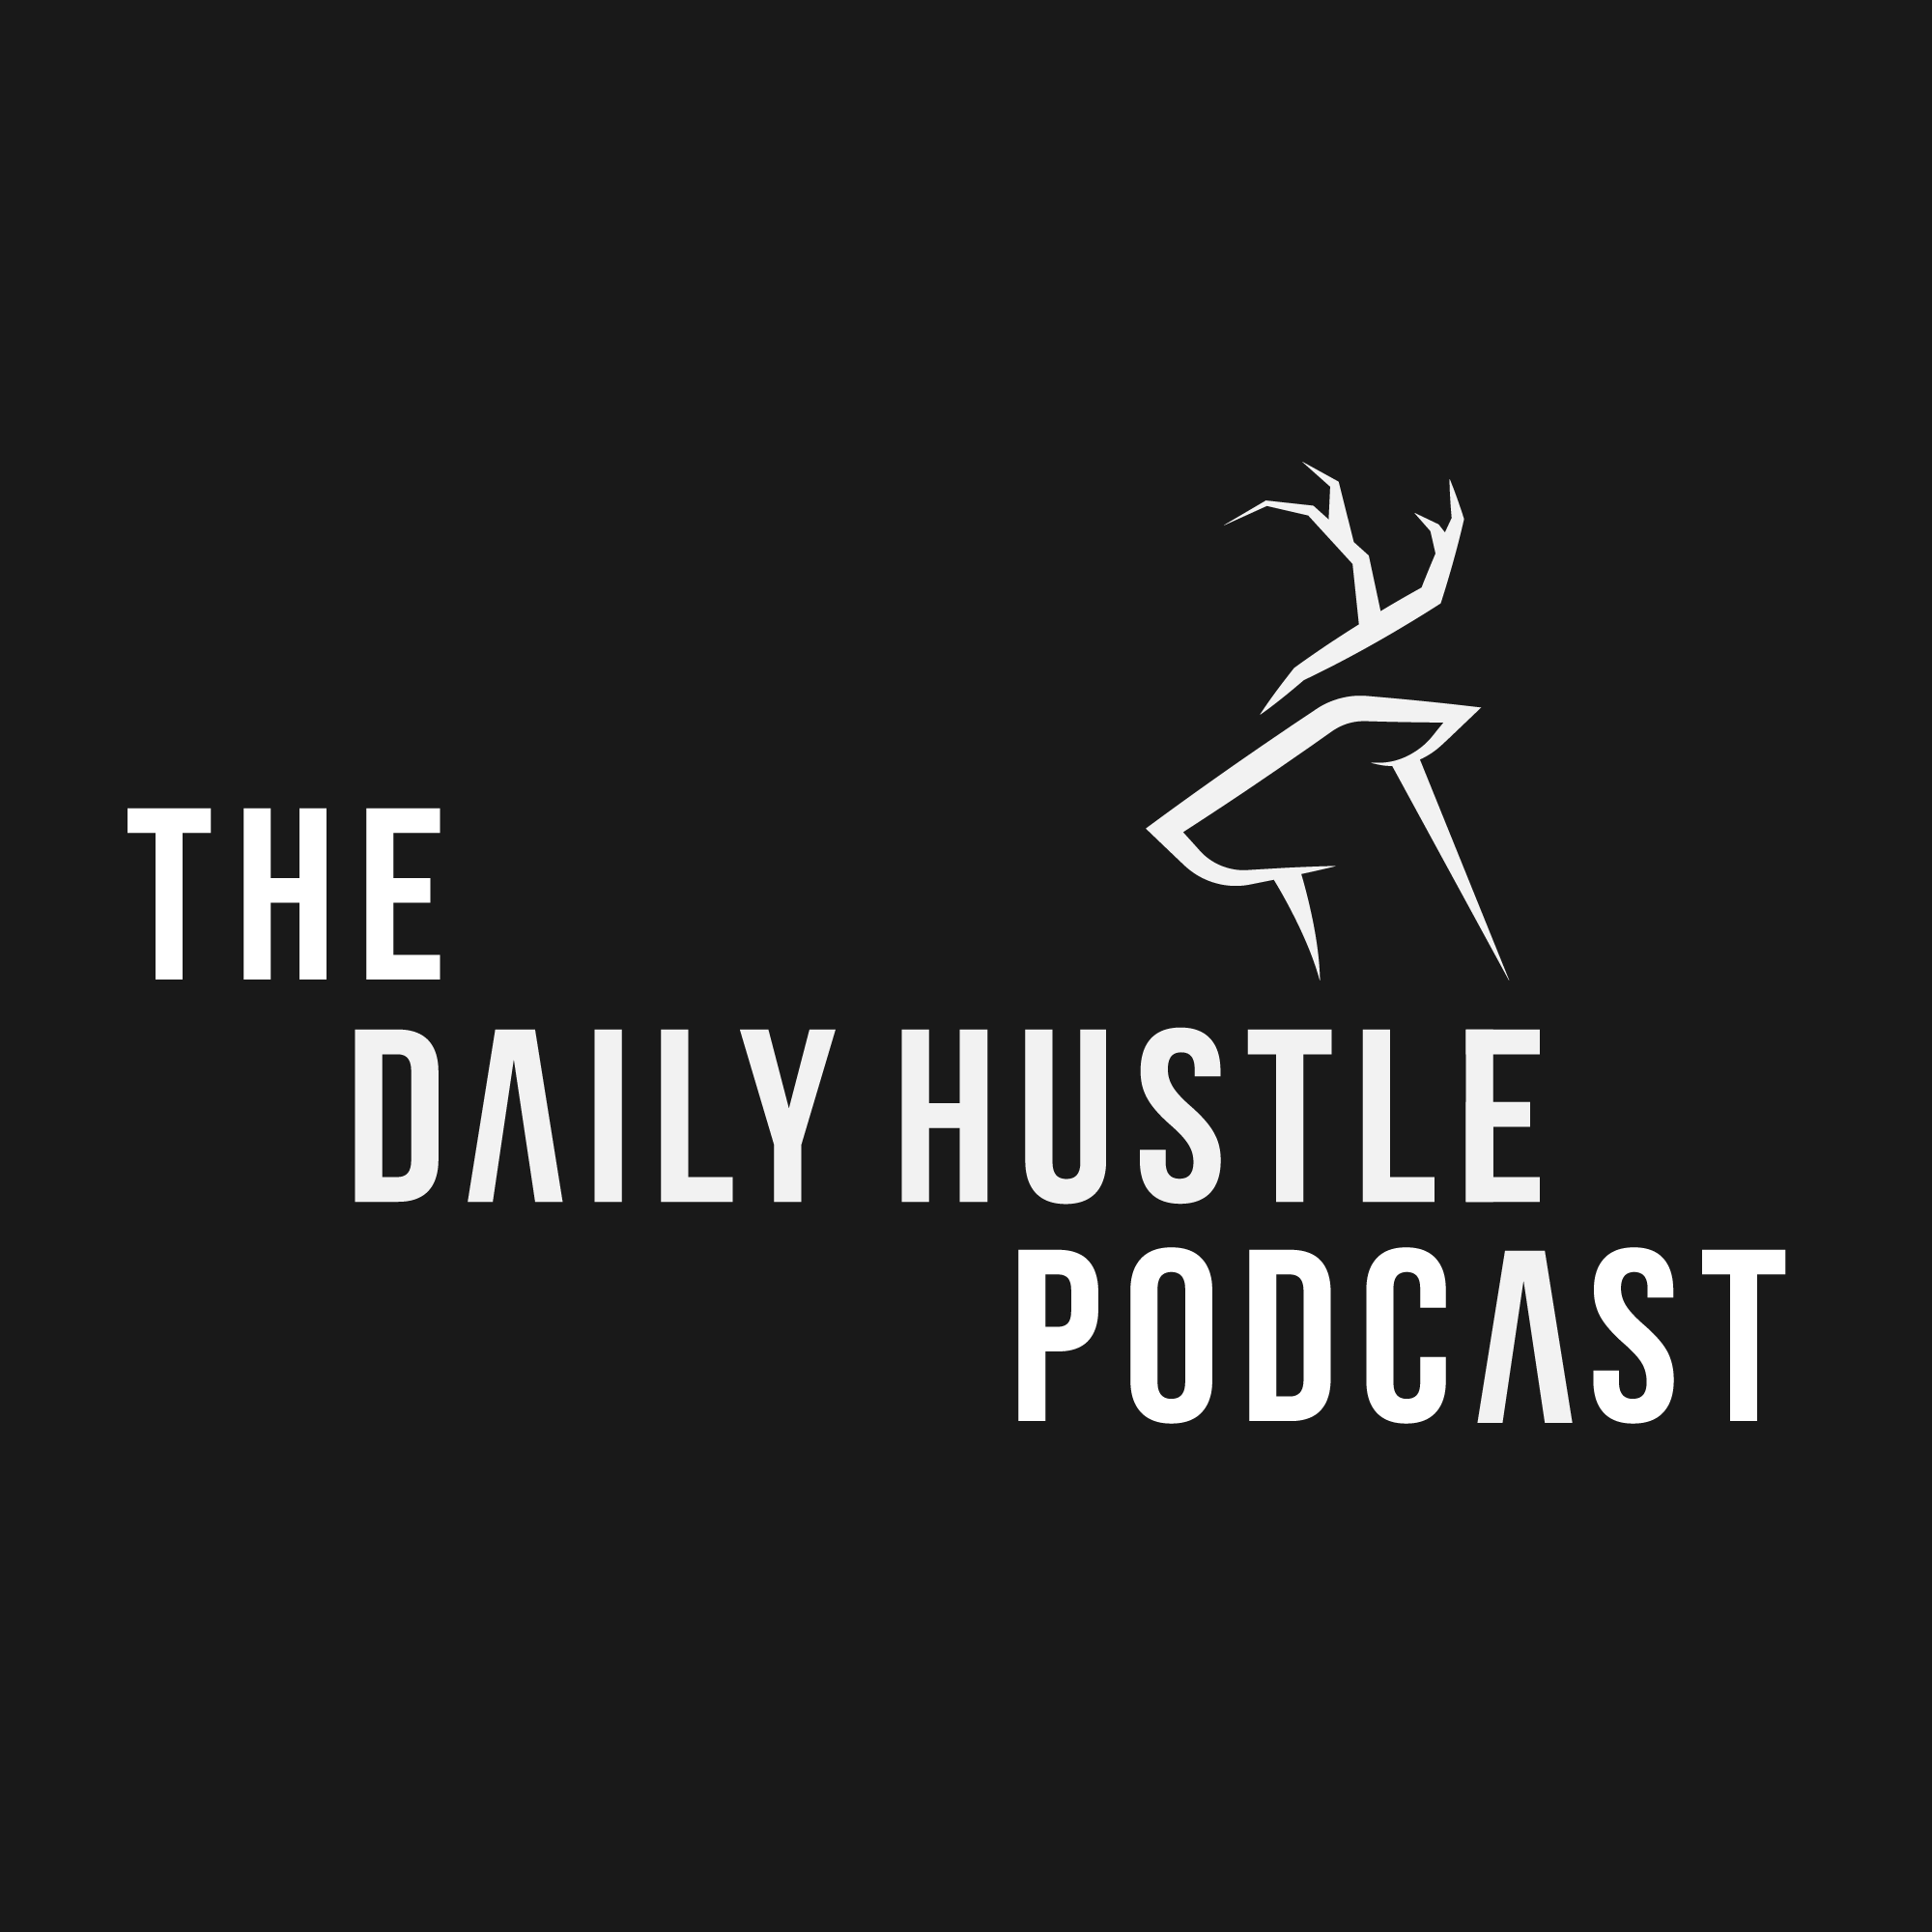 The Daily Hustle Podcast